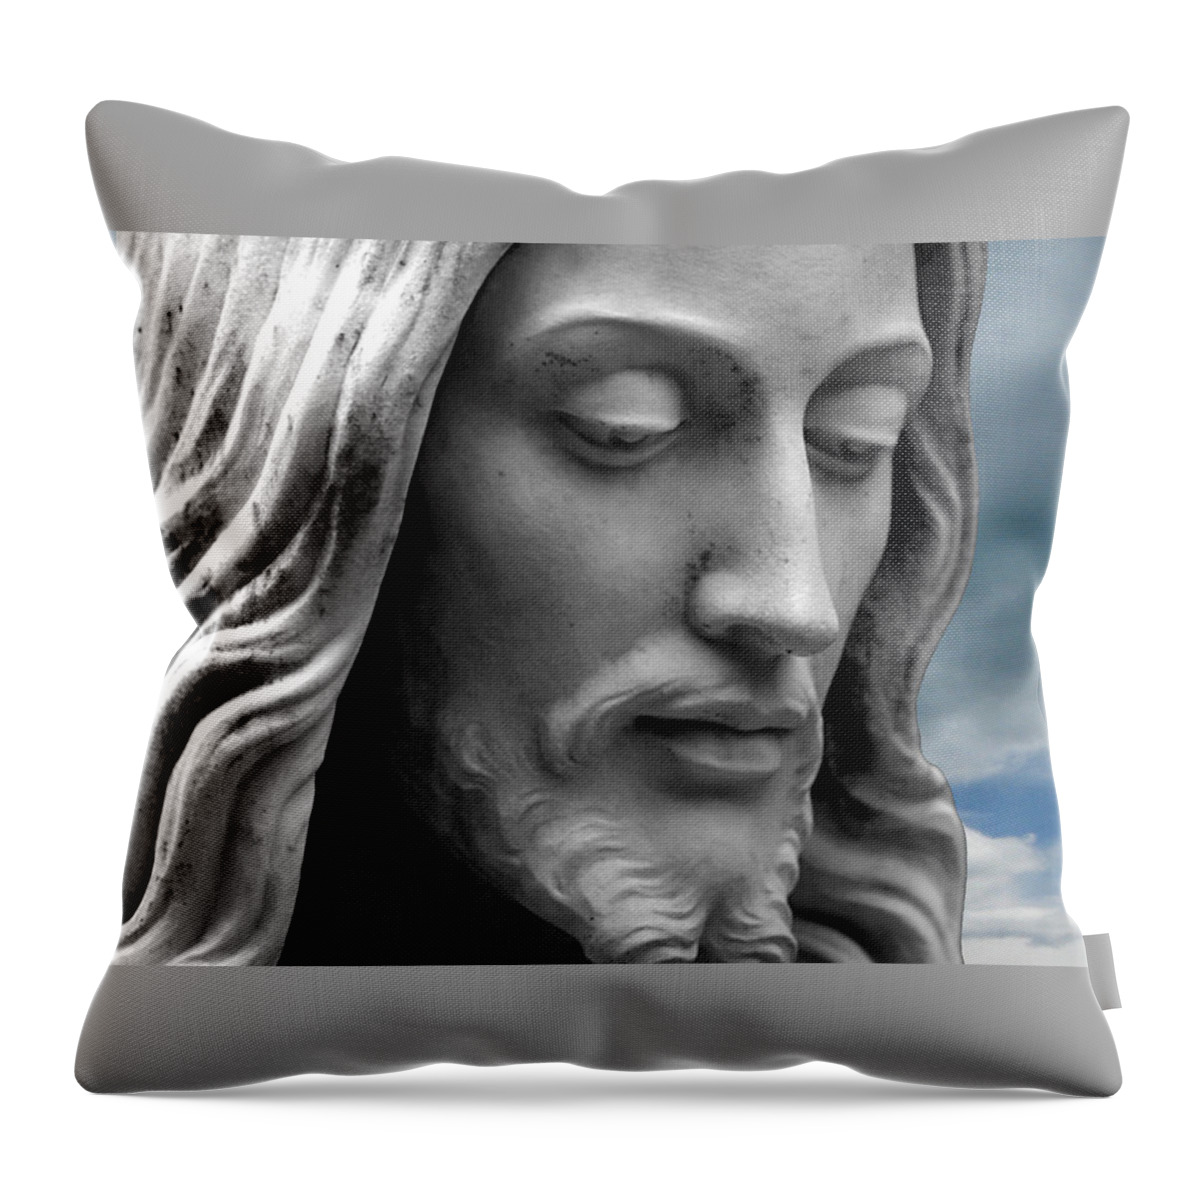 Jesus Throw Pillow featuring the photograph Quiet Time by Munir Alawi